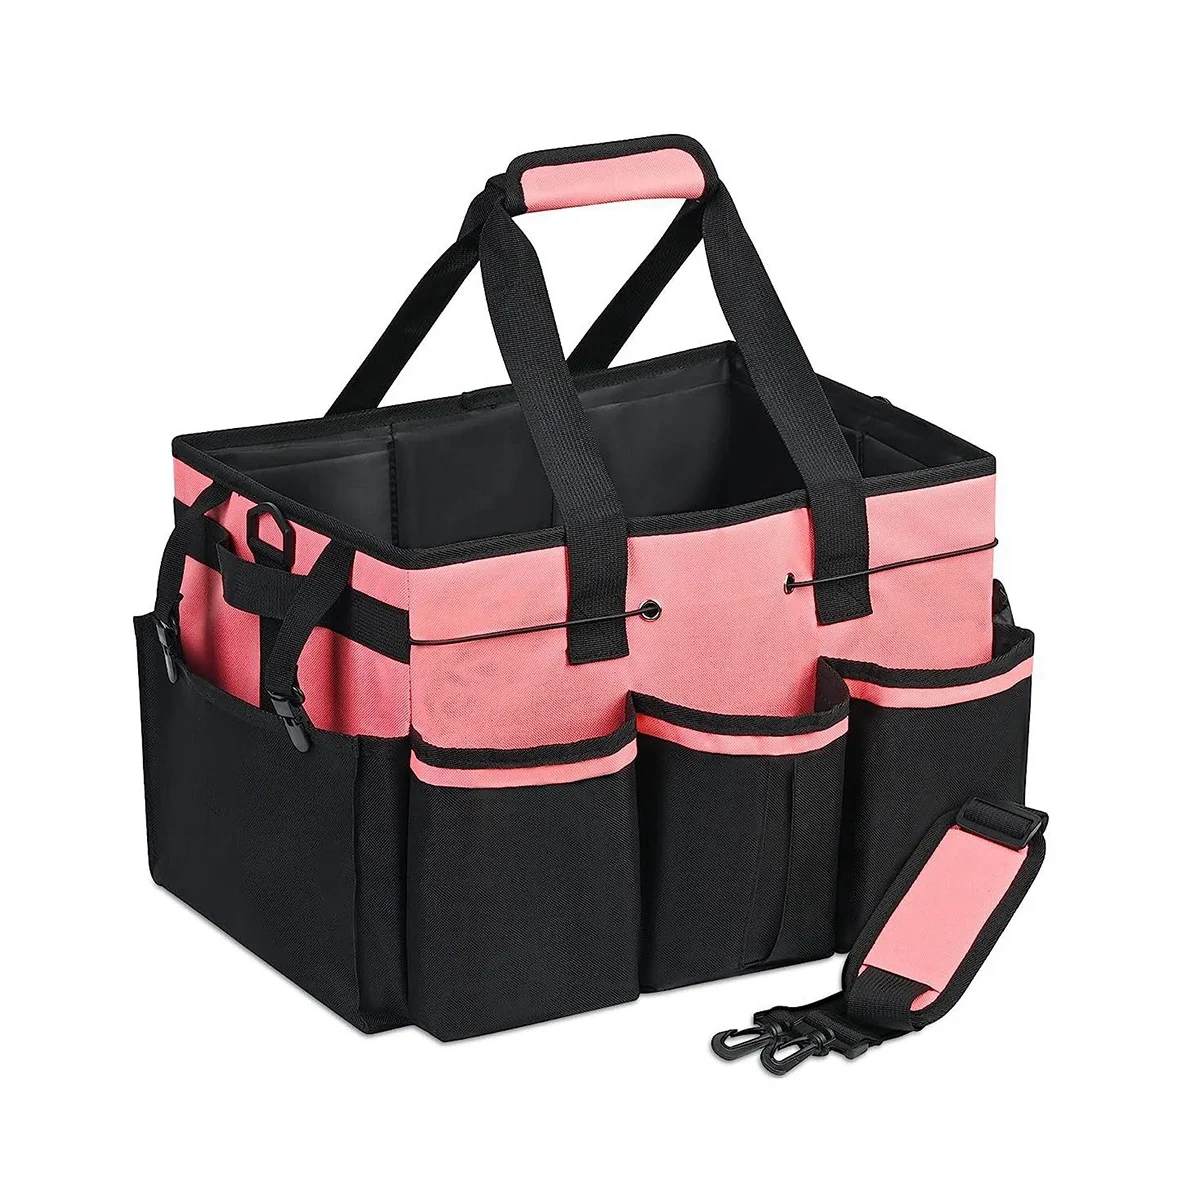 

Wearable Cleaning Storage Bag, Cleaning Tool Organizer with Adjustable Strap, Waterproof Bag with 4 Foldable Dividers